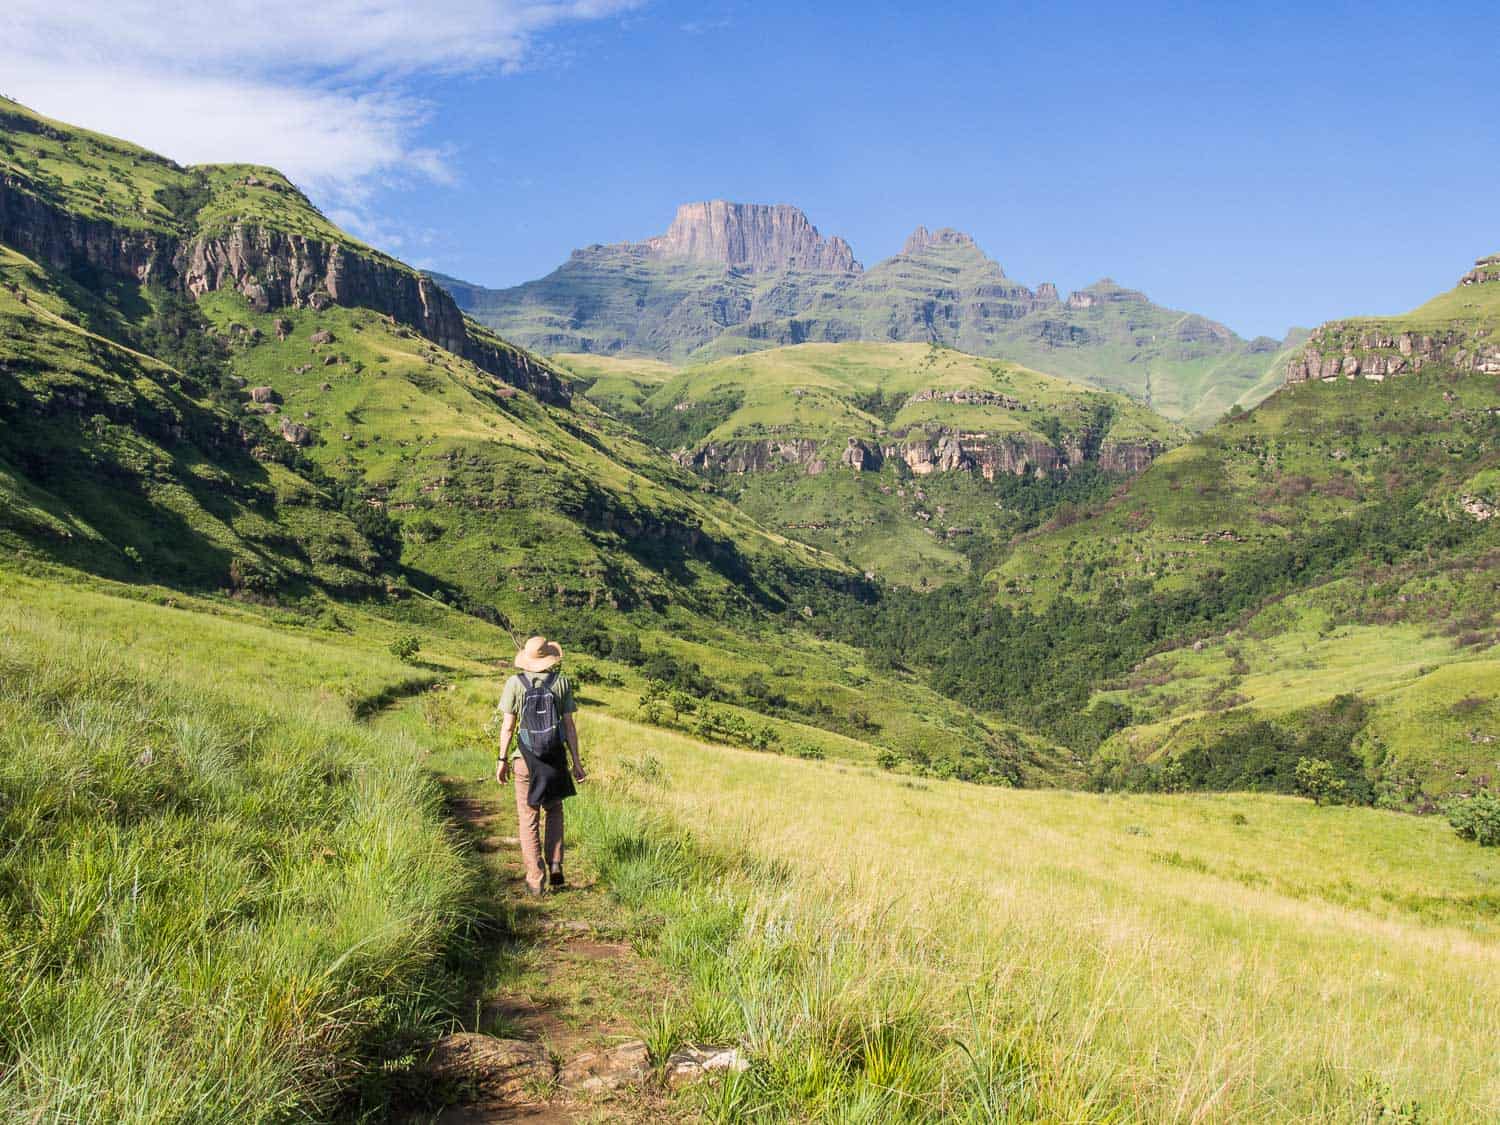 Hiking from Monks Cowl in the Drakensberg Mountains, South Africa